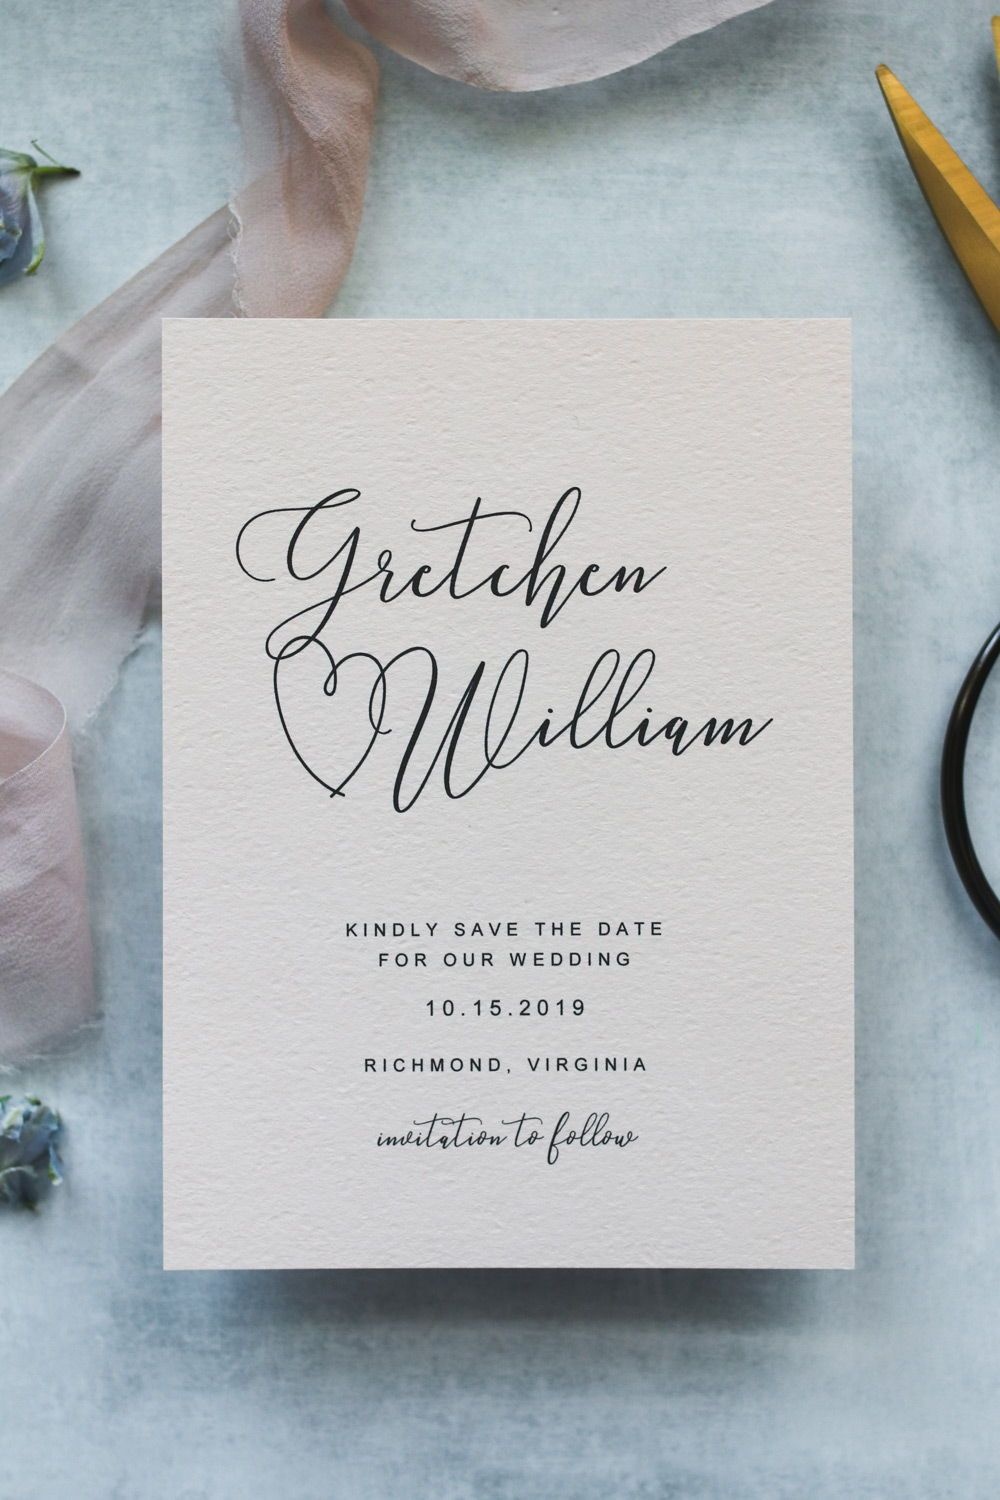 Free Save The Date Templates | Save The Date Ideas | Save The Date - Free Printable Save The Date